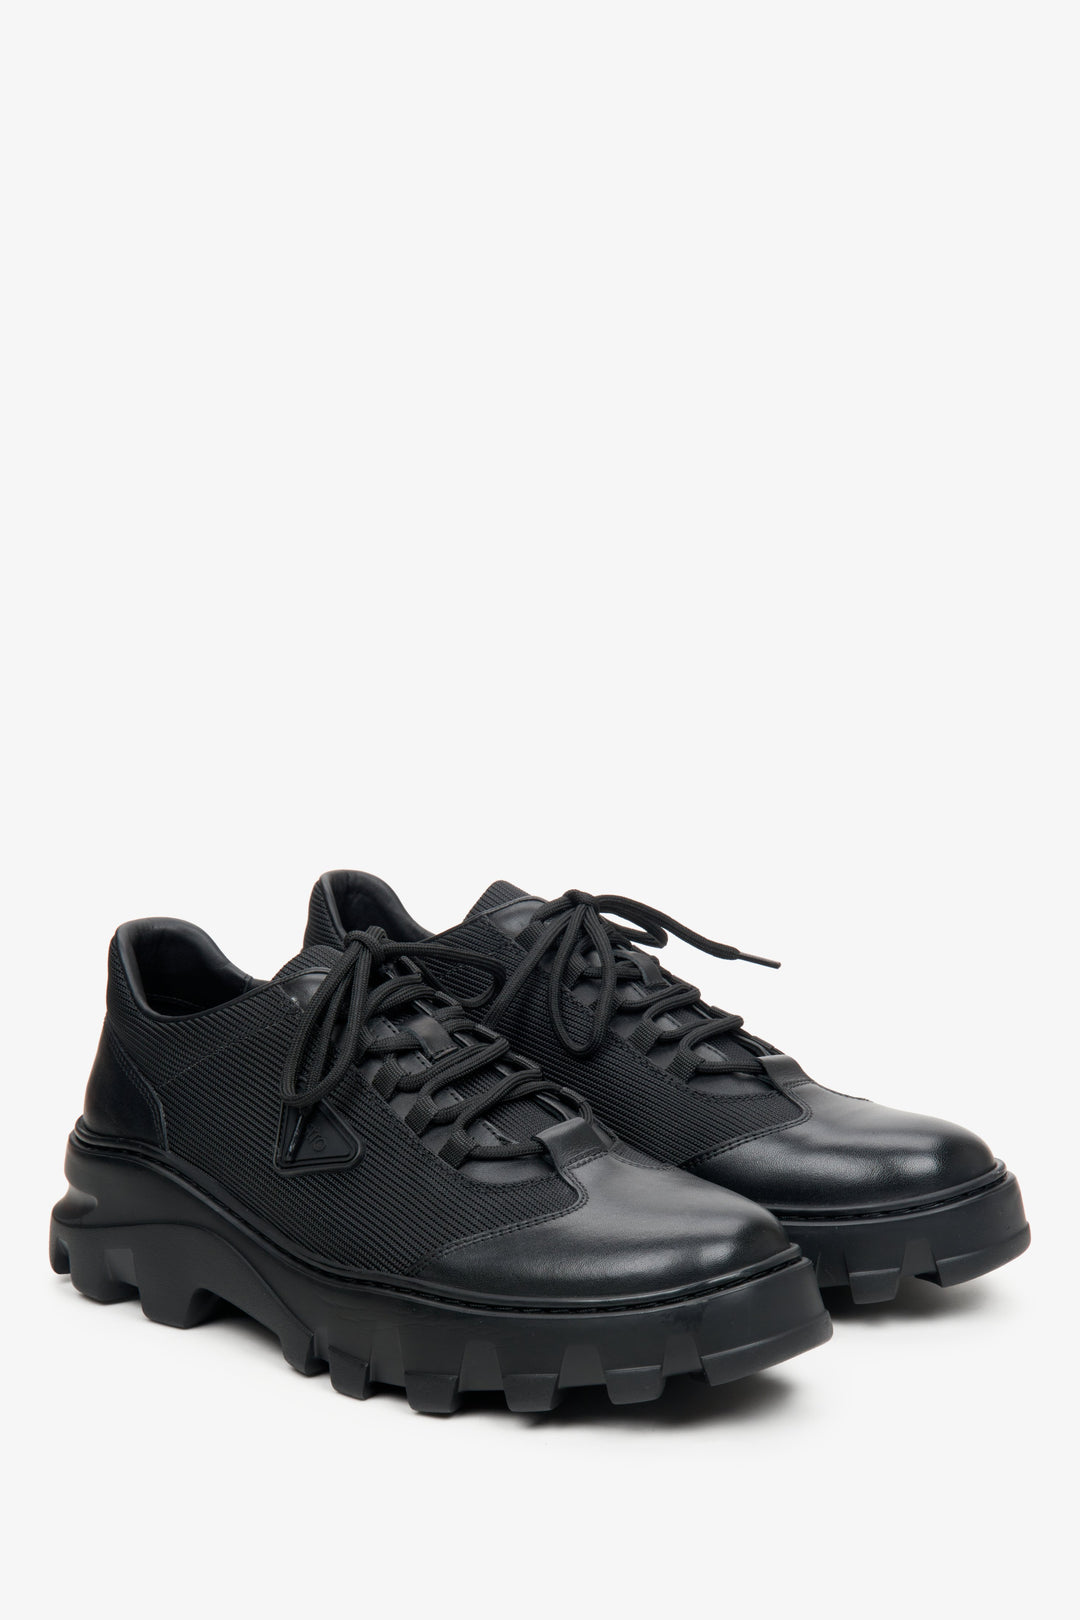 Men's black lace-up shoes made of mixed materials by Estro.